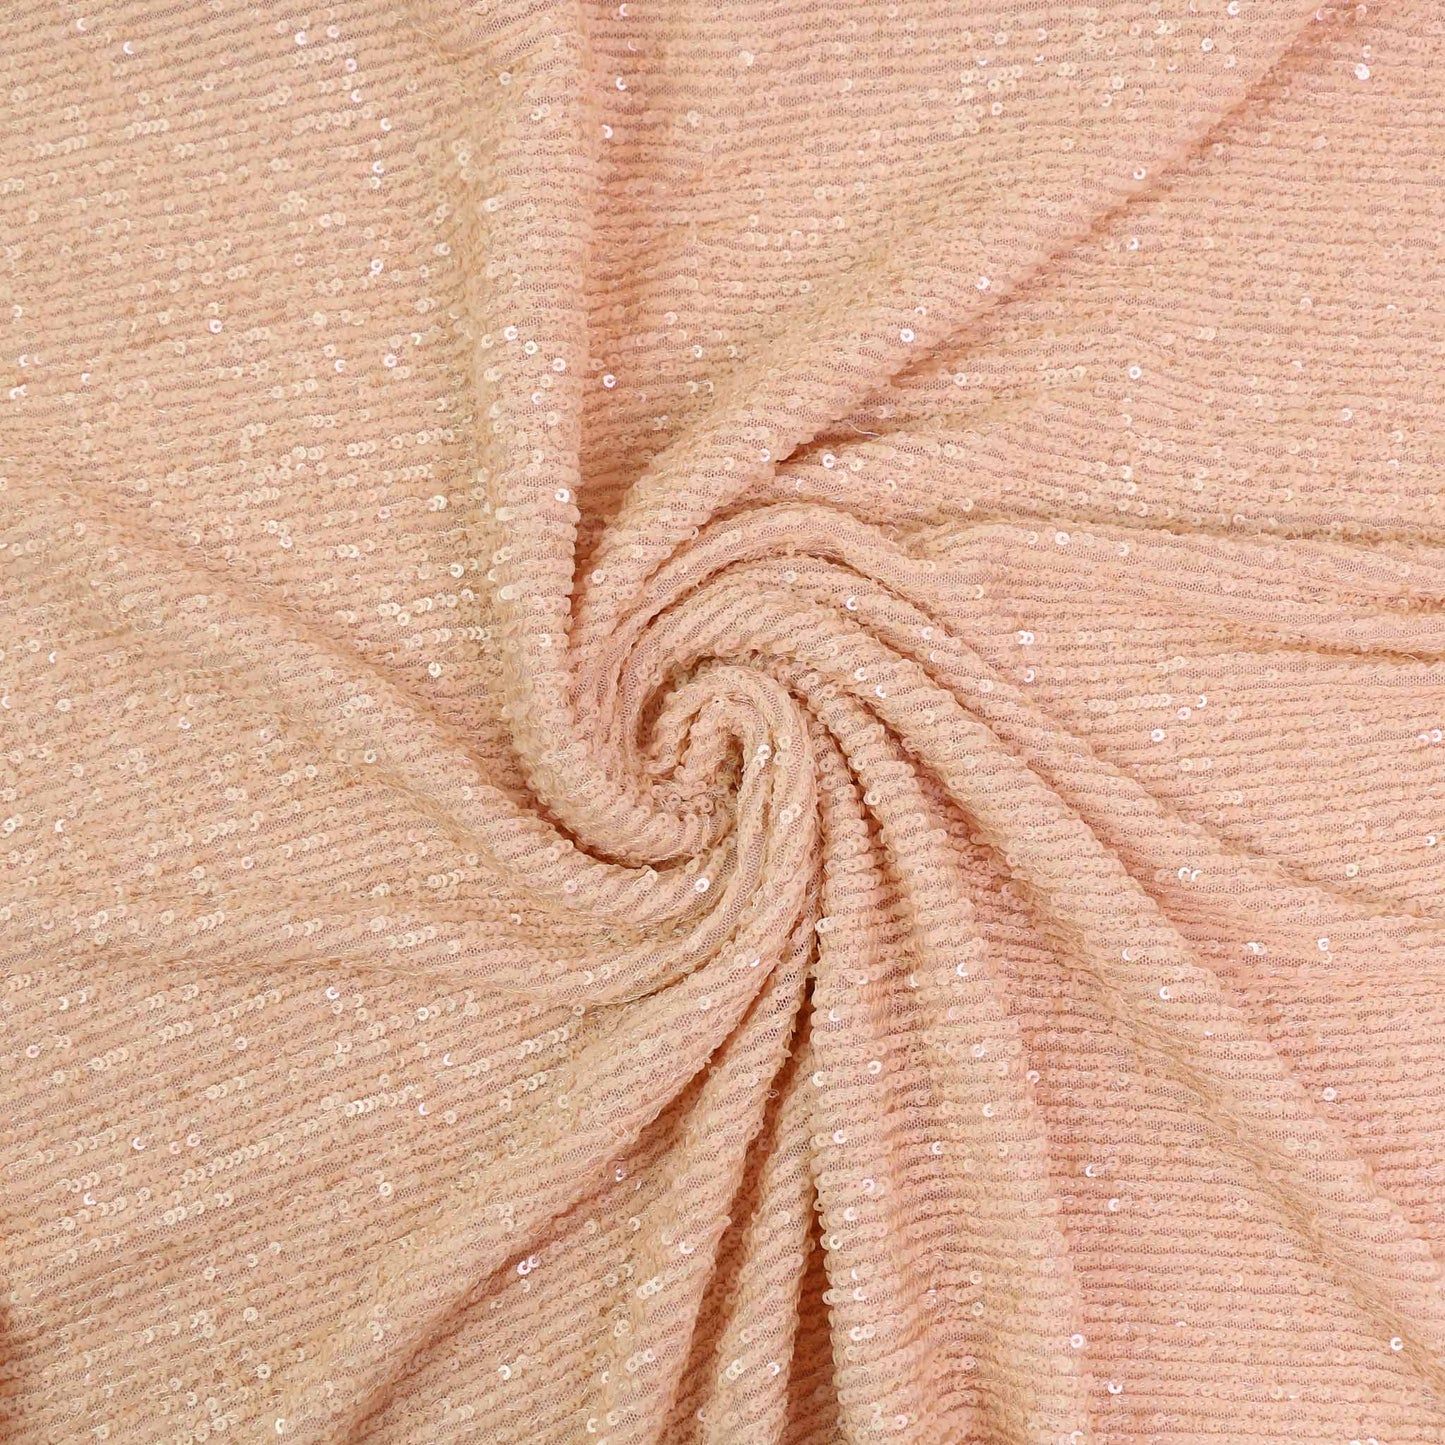 Stretchy Sequin Fabric - Pale peach